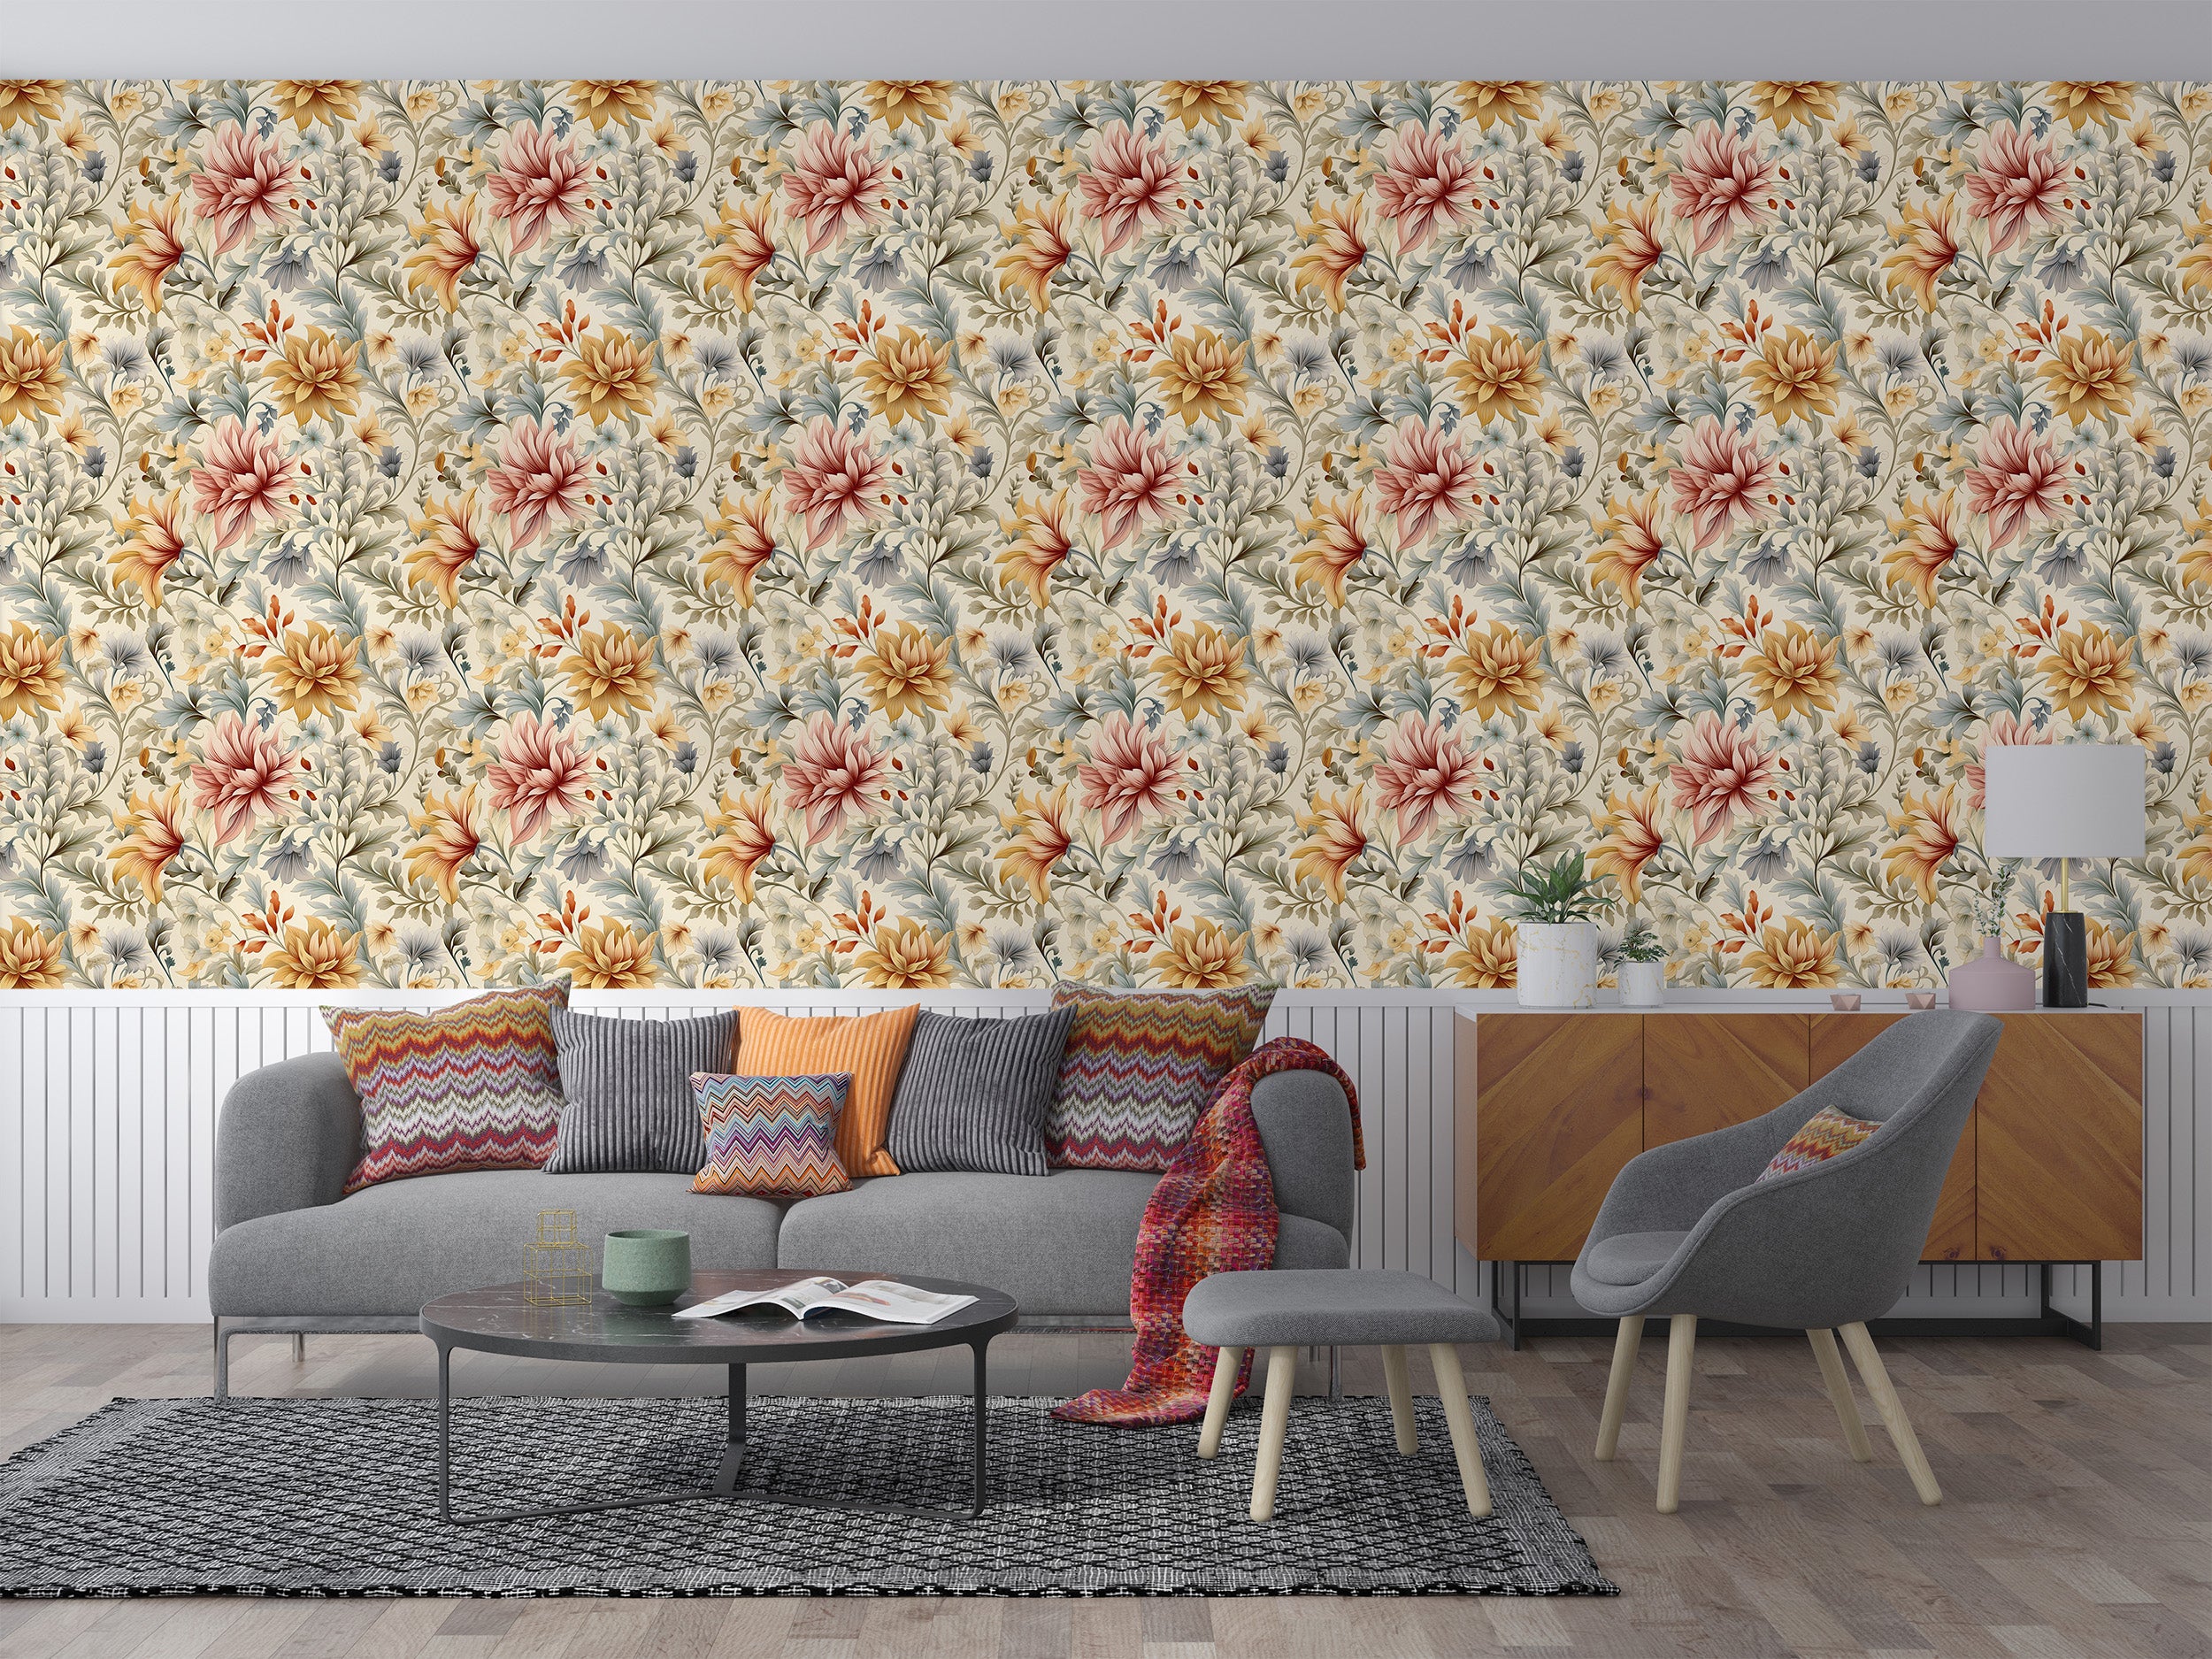 Colorful Floral Peel and Stick Wallpaper in Room